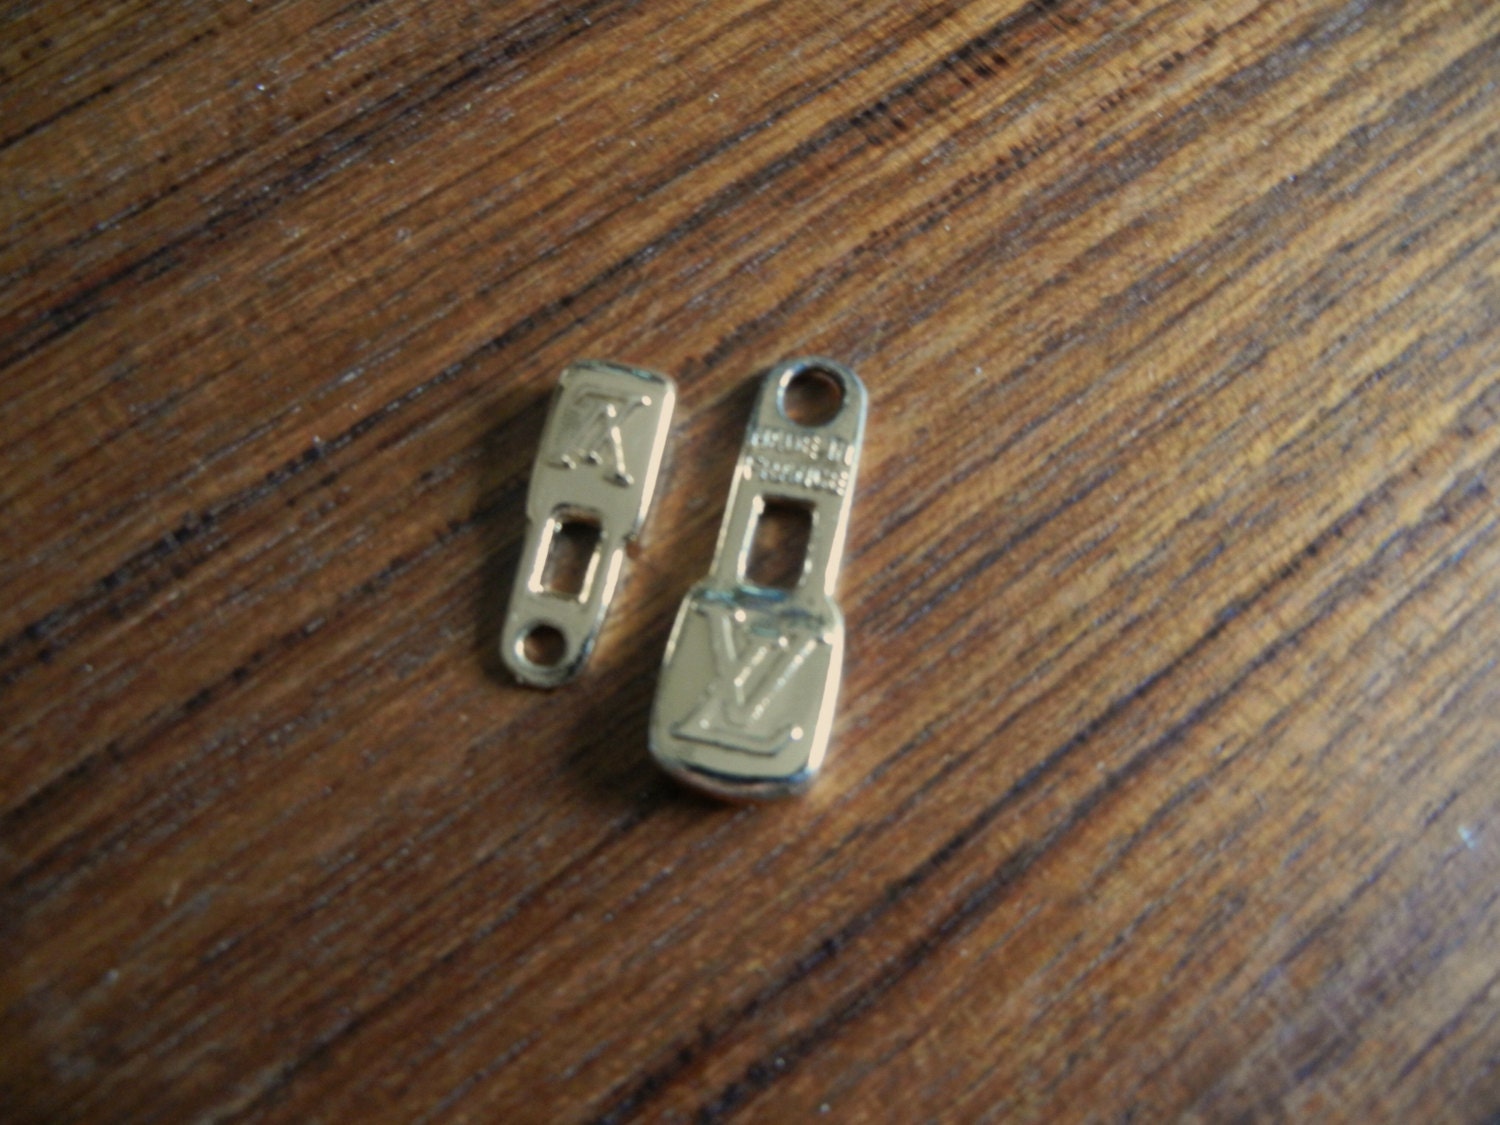 Louis Vuitton zipper pulls 2 pieces for supplies or use as